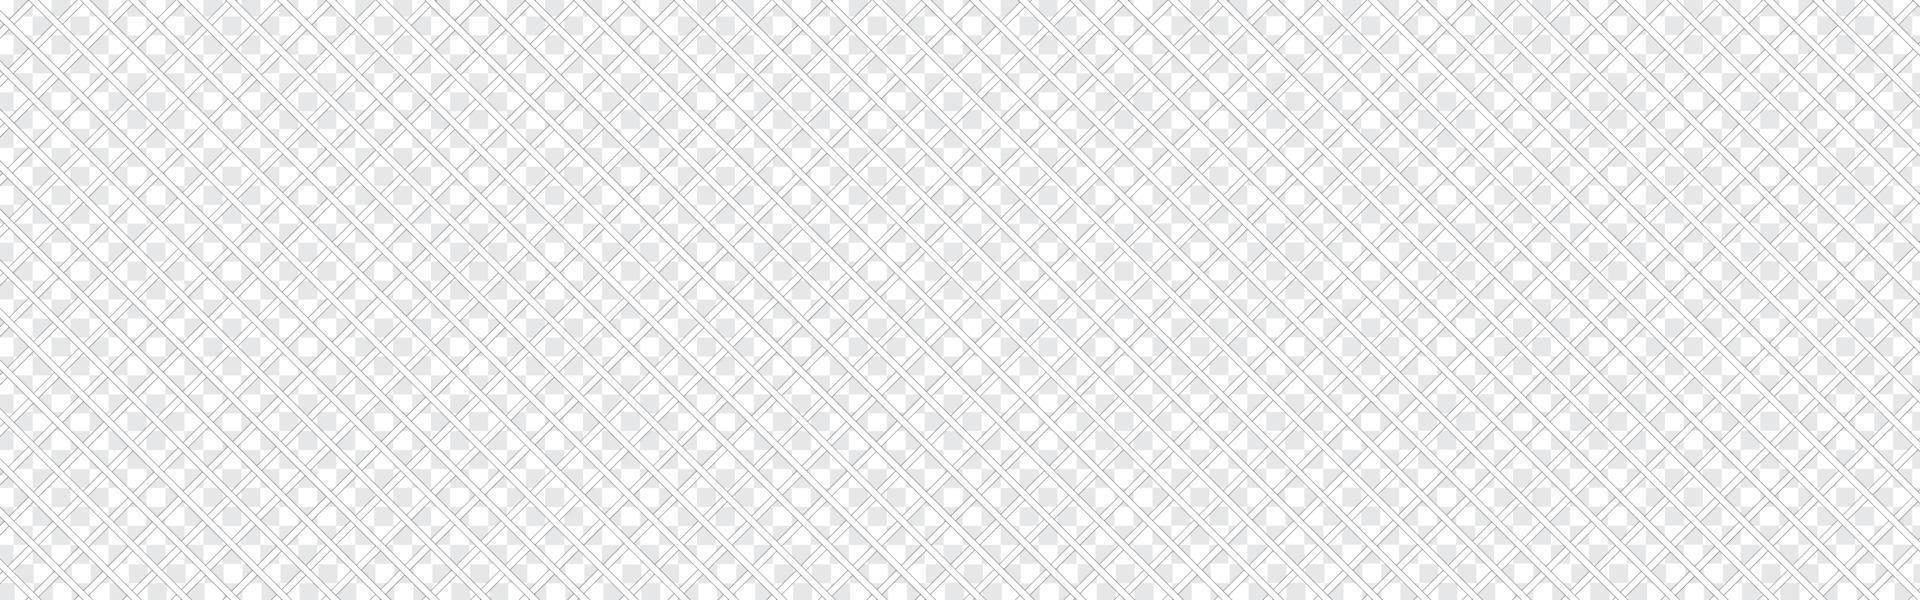 Seamless linear pattern with thin poly lines, polygons and. Abstract geometric texture with crossing thin lines. Stylish background in gray and white colors. vector